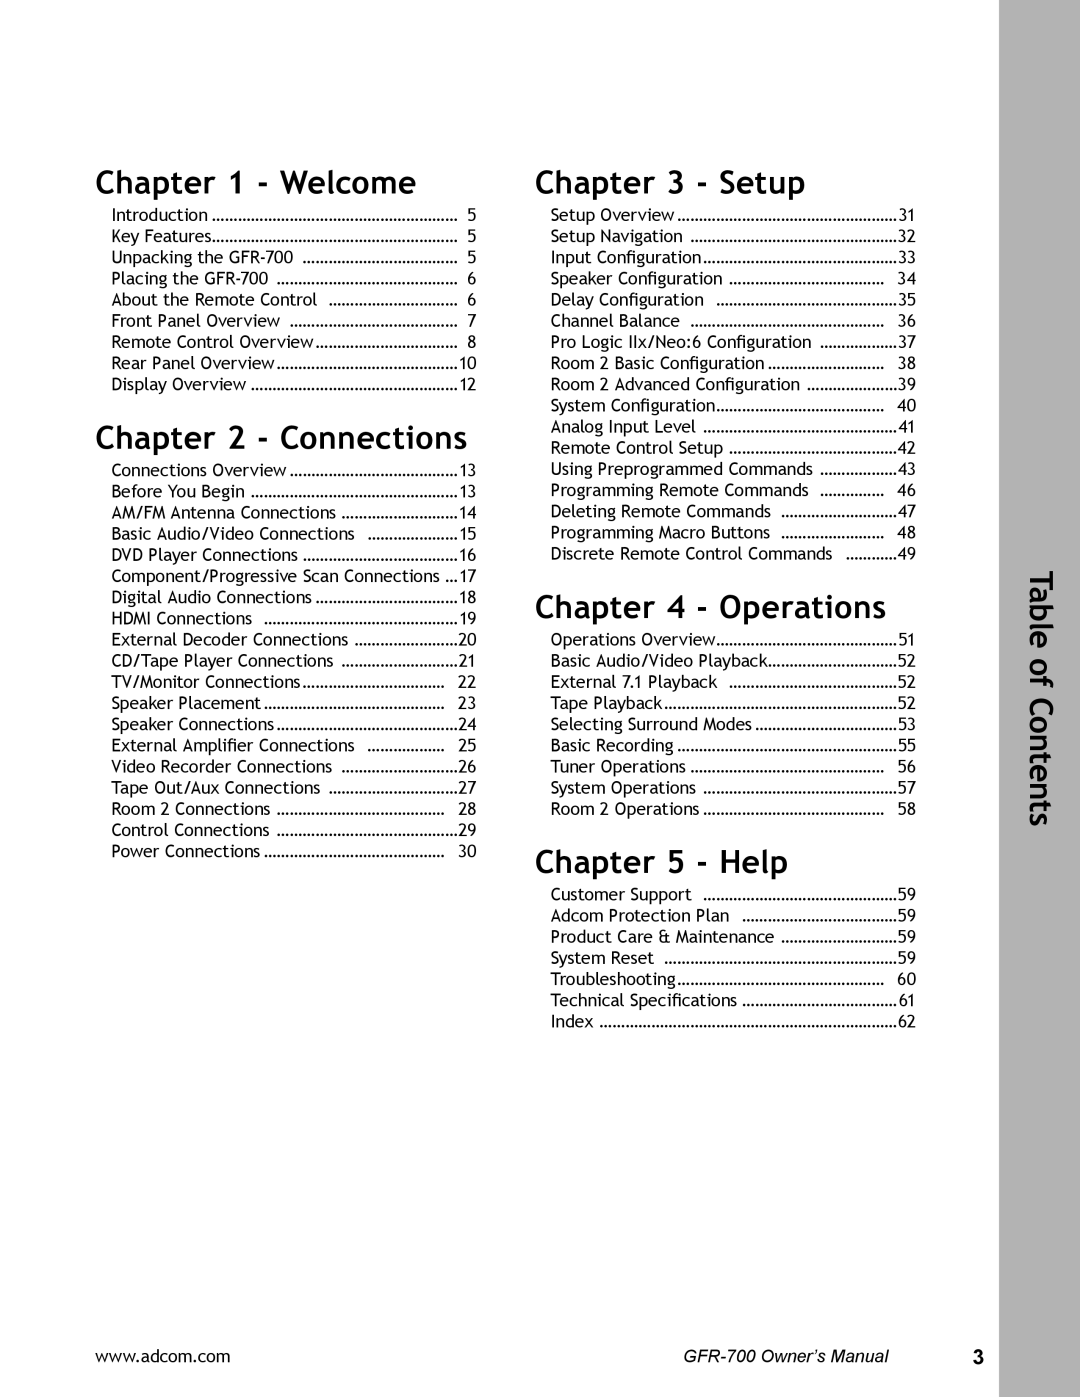 Adcom GFR-700 user manual Welcome, Connections, Setup, Operations, Help, Table of Contents 